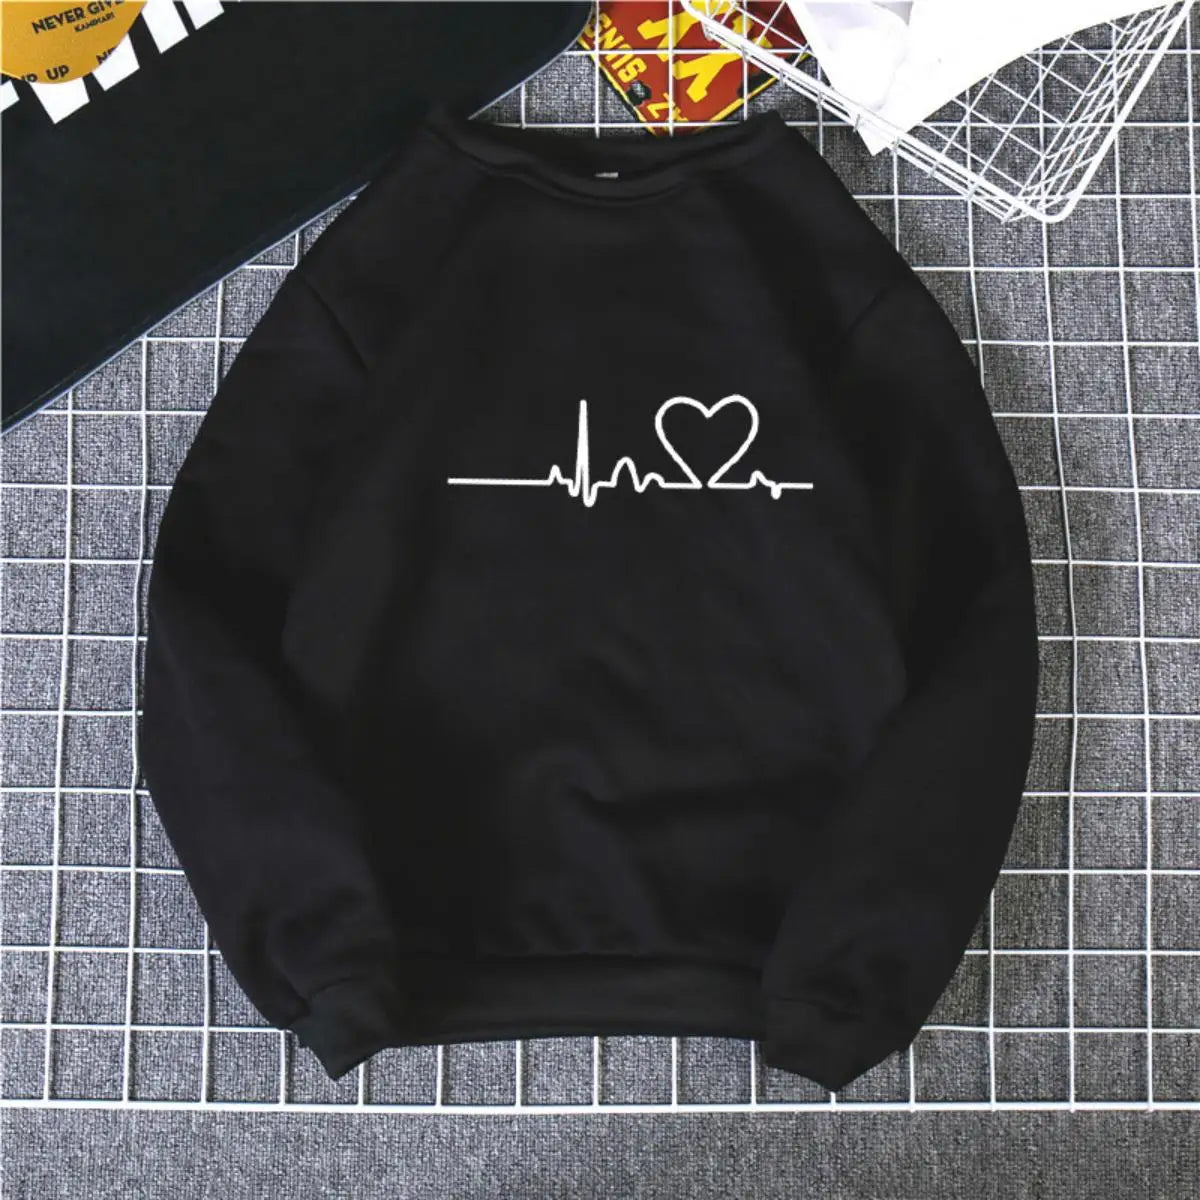 Autumn And Winter Women's Fashion Casual Round Neck Sweatshirt Y2K Heart Rate Print Trendy Street Cute Loose Pullover